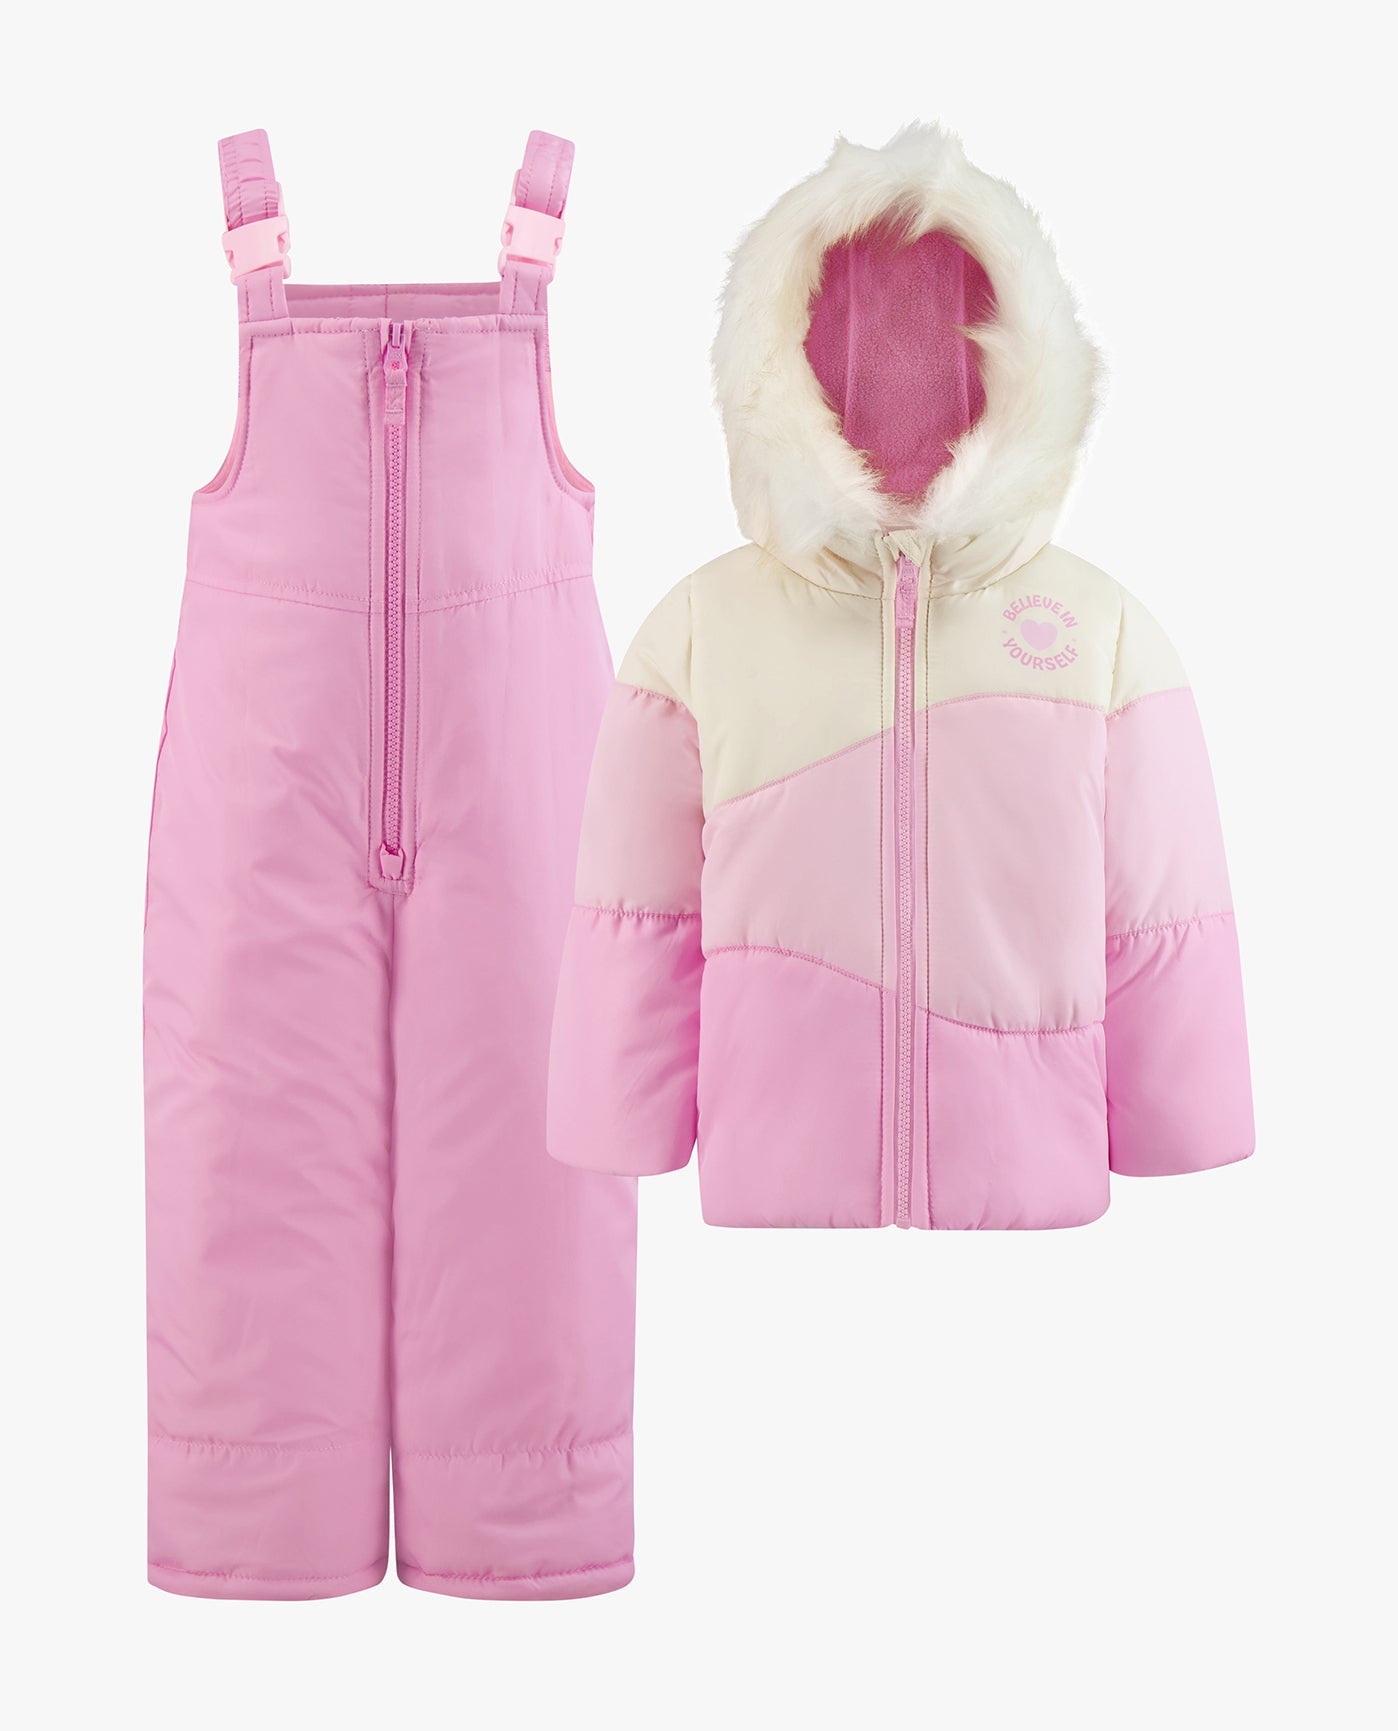 MAIN IMAGE OF BABY GIRLS ZIP-FRONT COLOR BLOCK JACKET AND OVERALL SNOW PANT | PINK